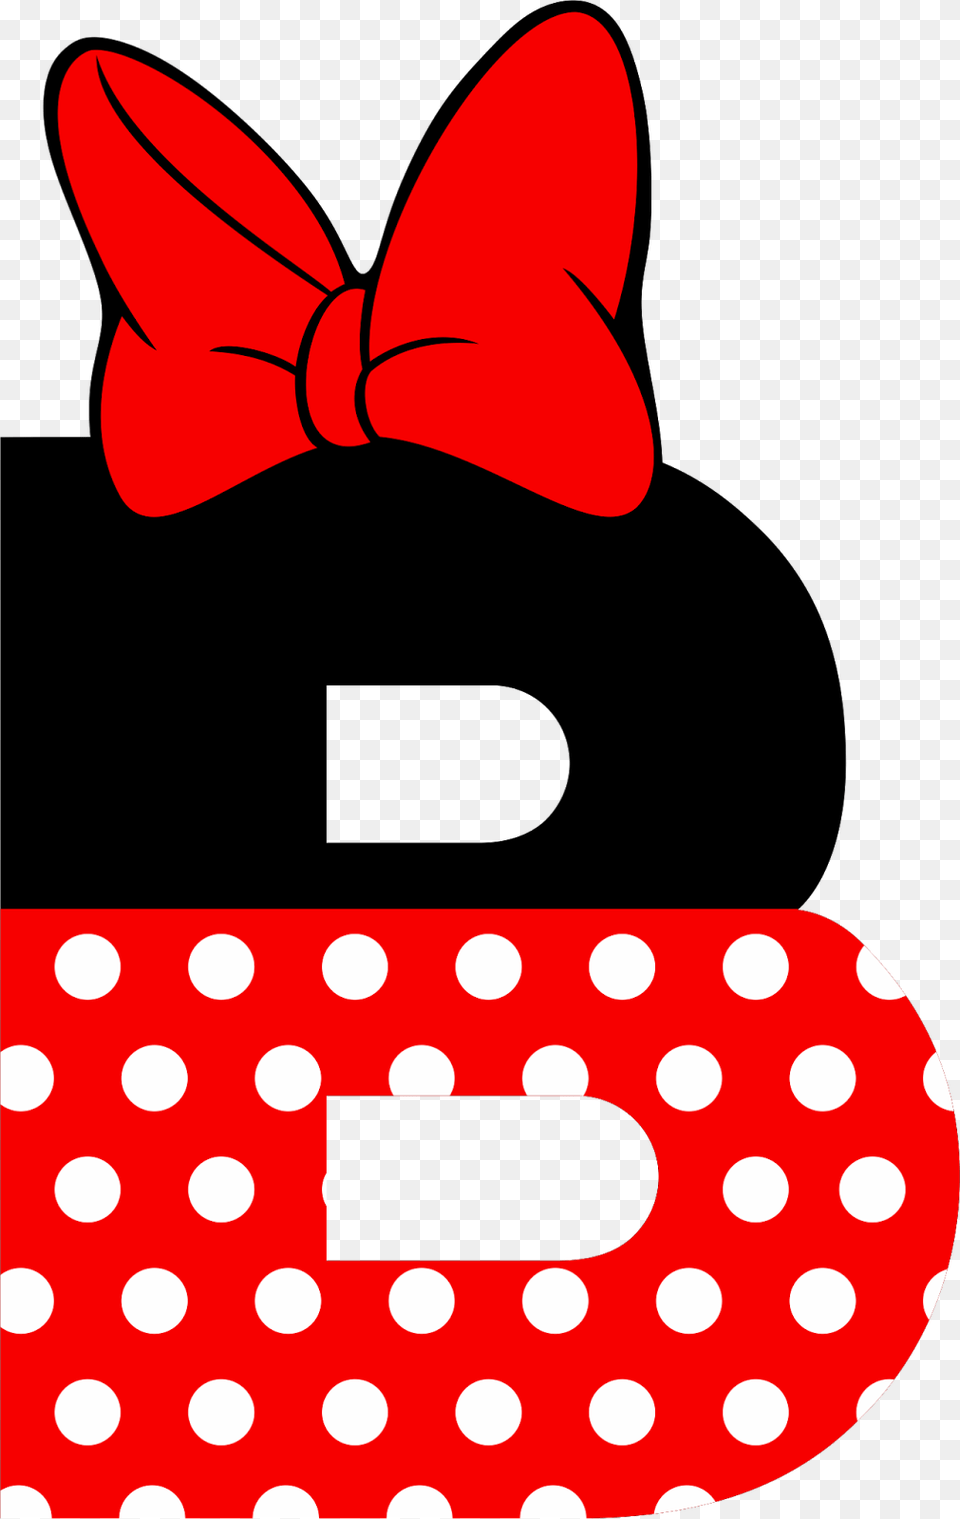 Pin By Merie Annalyn Aguilar On 1st Amp 2nd Birthday Minnie Mouse Alphabet Letters, Pattern, Accessories, Tie, Formal Wear Free Transparent Png